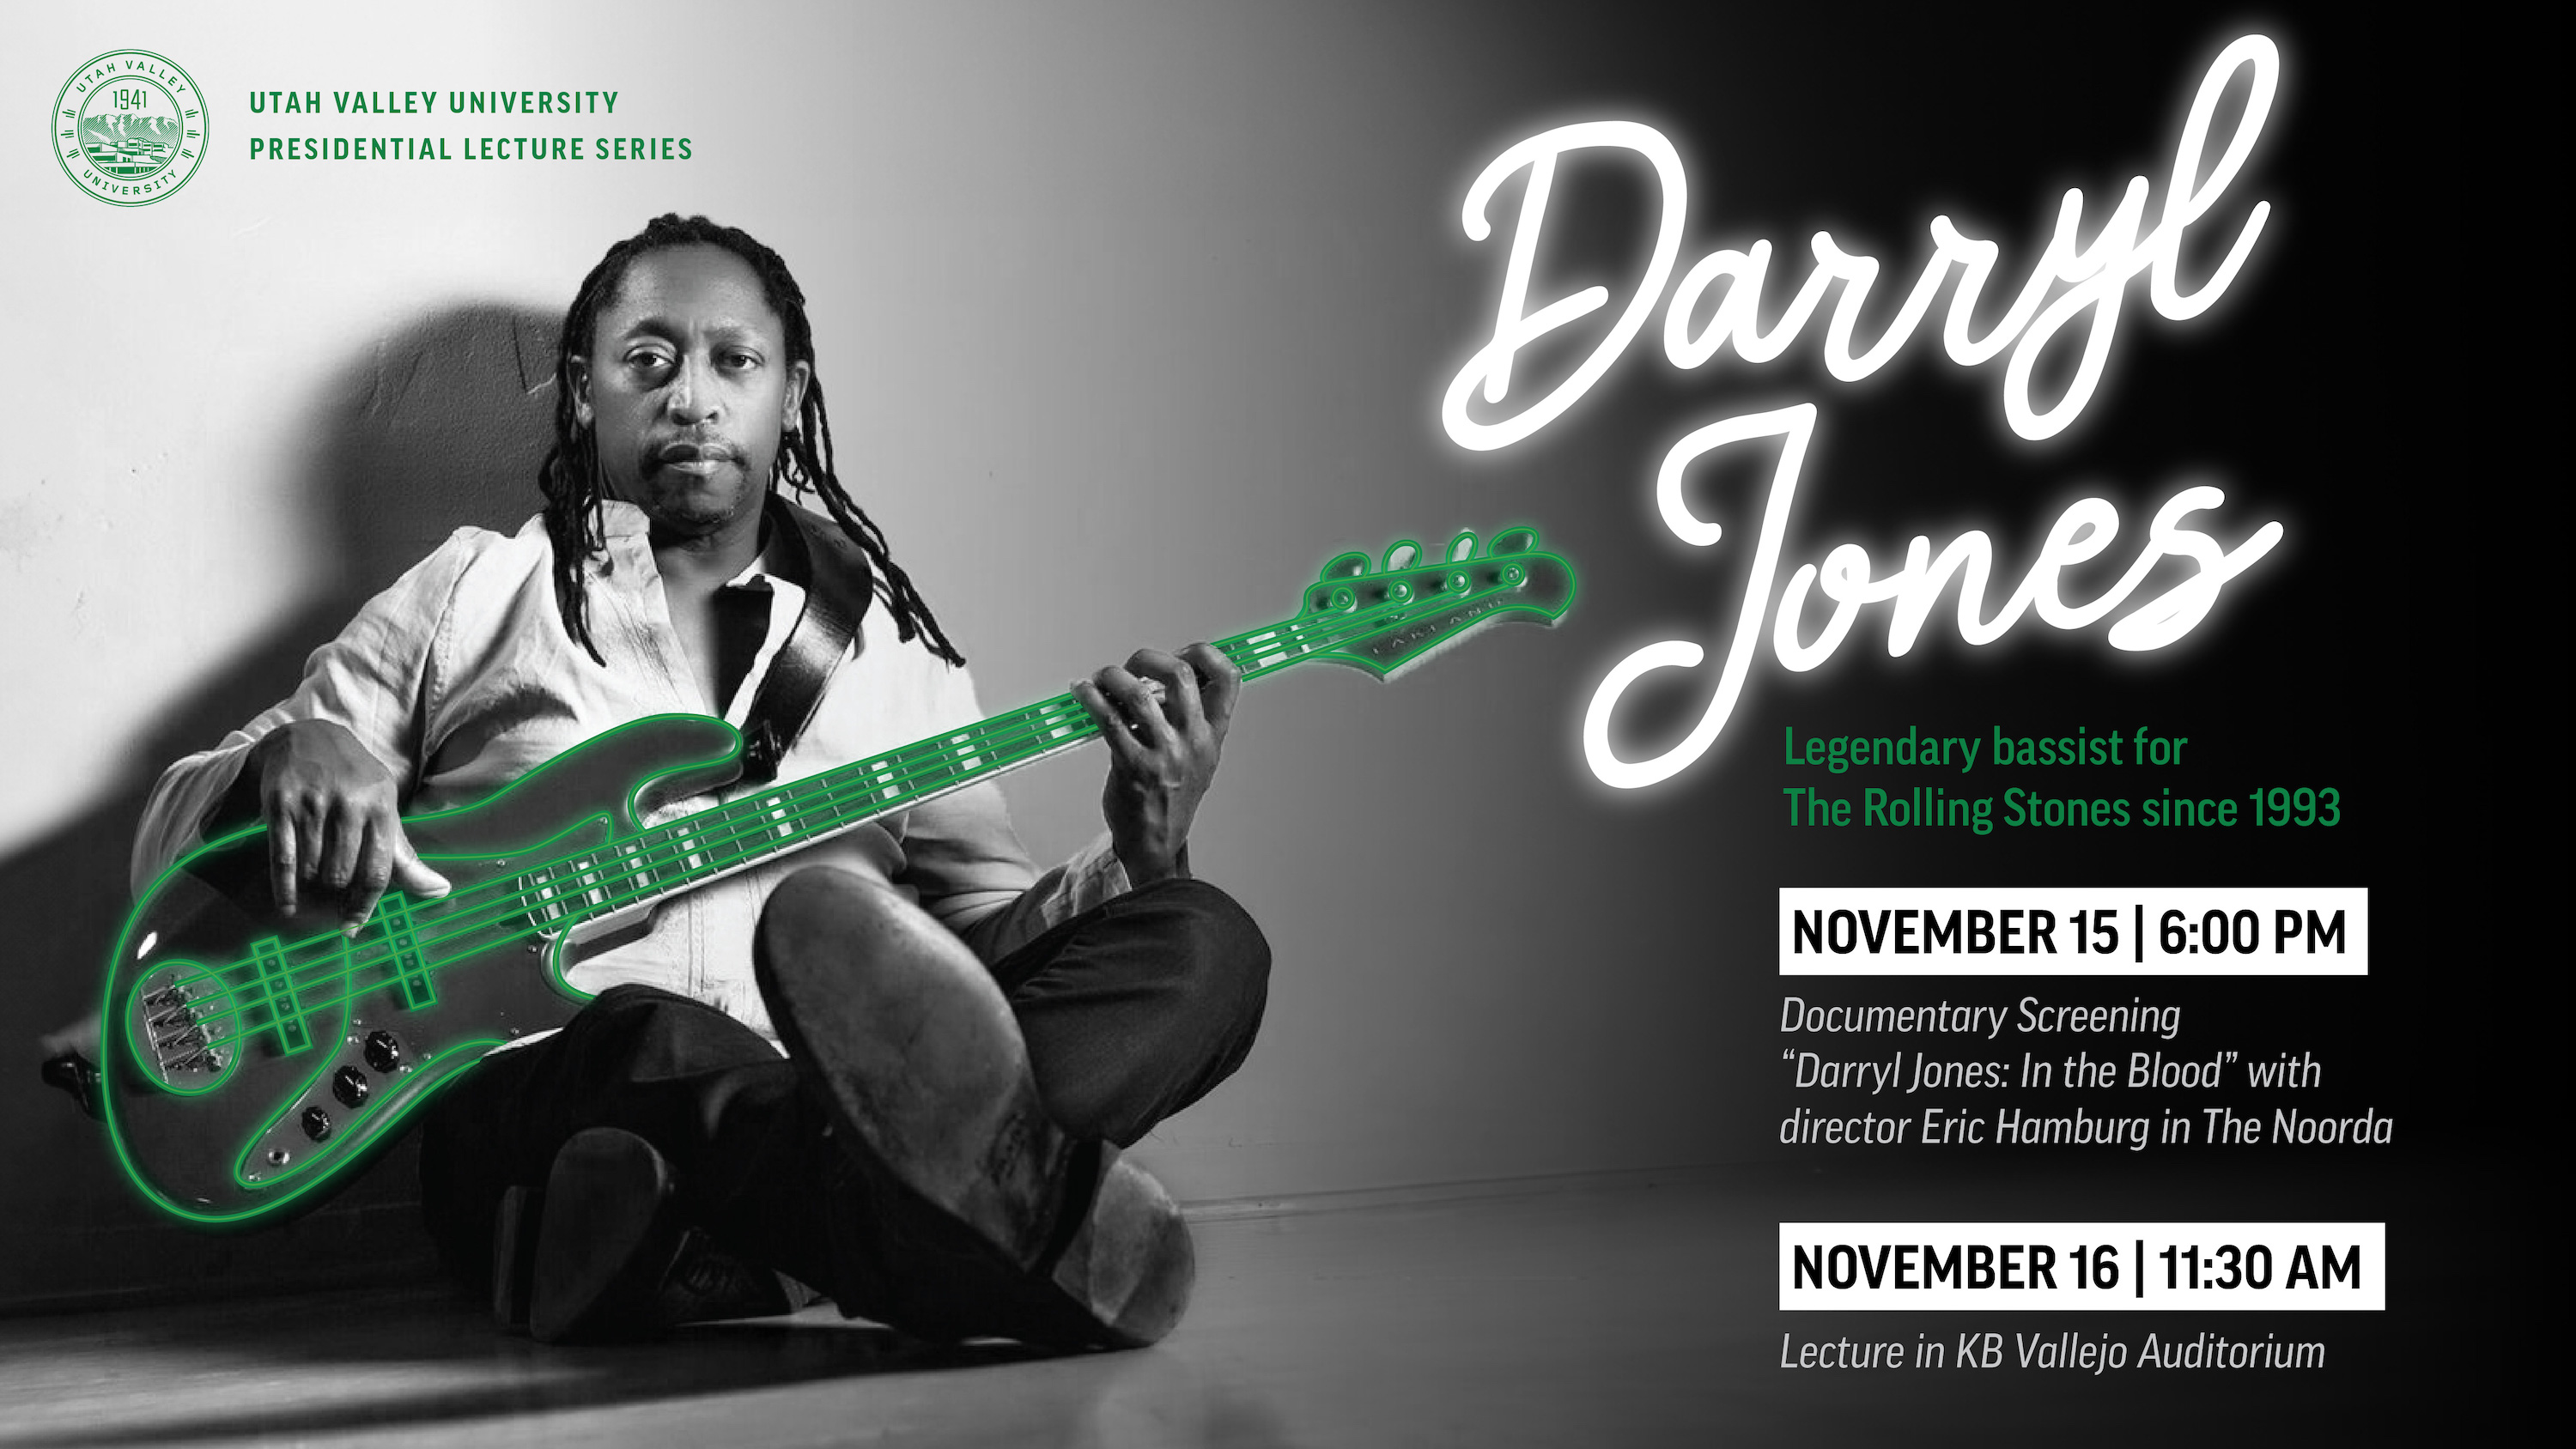 Darryl Jones, legendary bassist for The Rolling Stones since 1993. November 15th @ 6pm. Documentary screening "Darryl Jones: In the Blood" with directory Eric Hamburg in The Noorda. November 16th @ 11:30am Lecture in KB Vallejo Auditorium. 